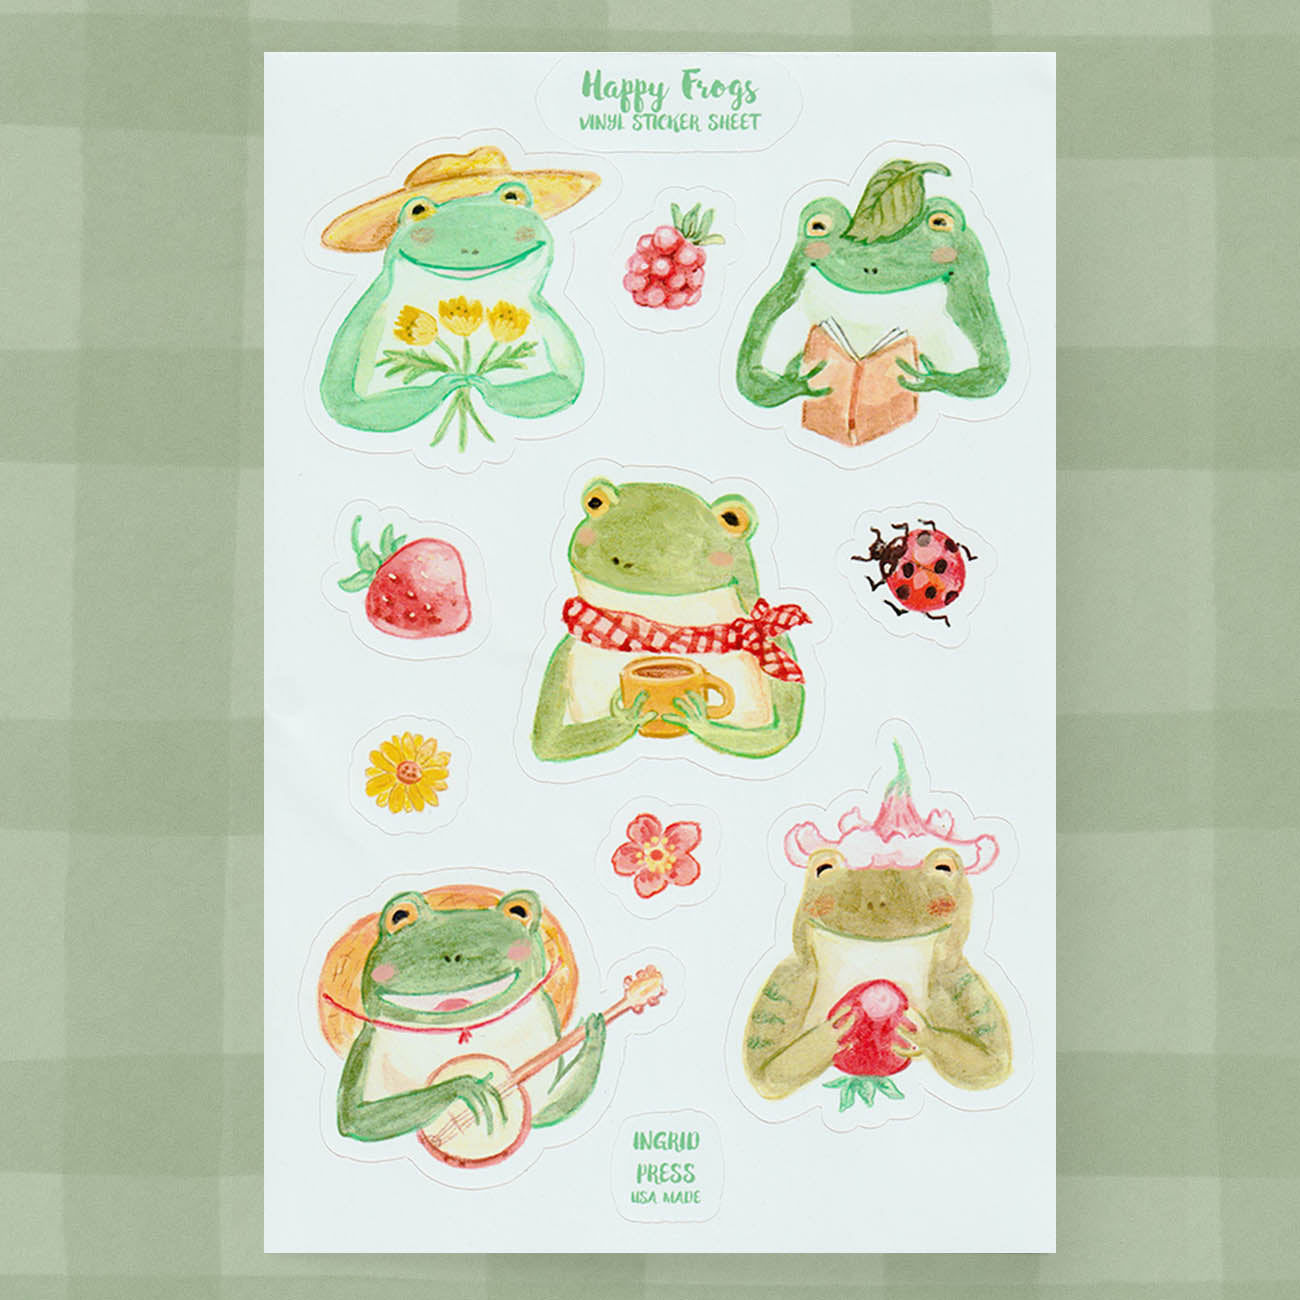 Frog Stickers Wholesale sticker supplier - Frog Stickers